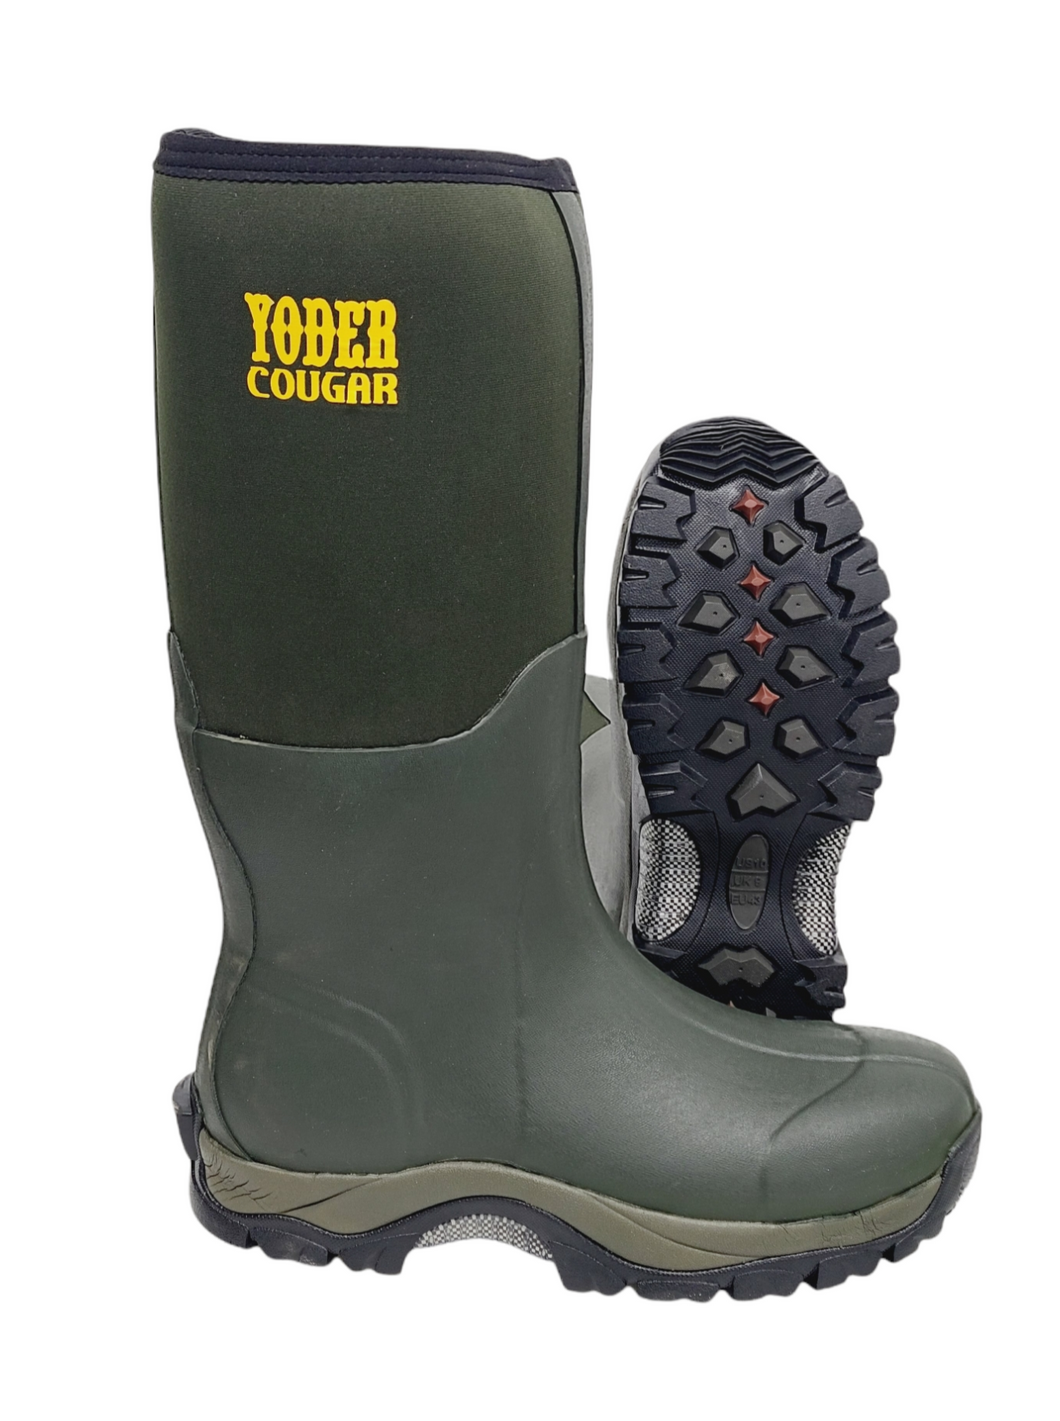 Yoder's Cougar Boot